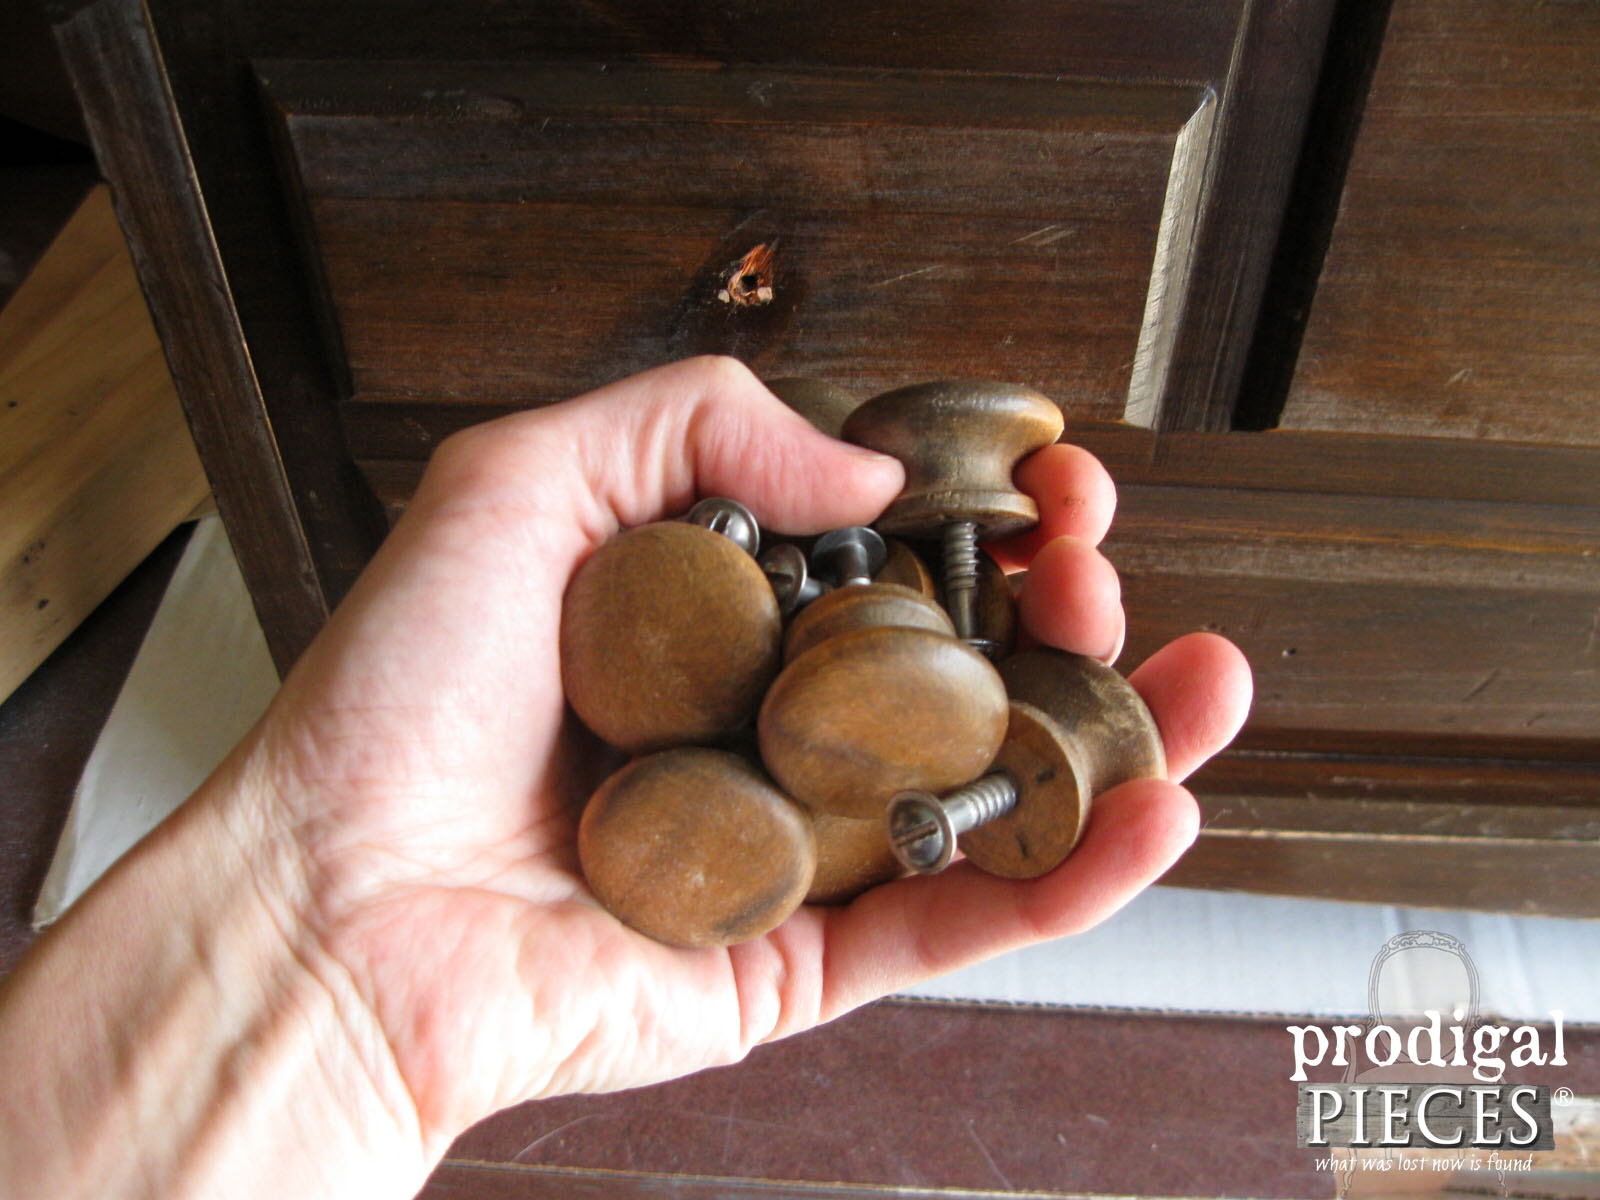 Replacing Plastic Knobs with Wooden Knobs | Prodigal Pieces | prodigalpieces.com